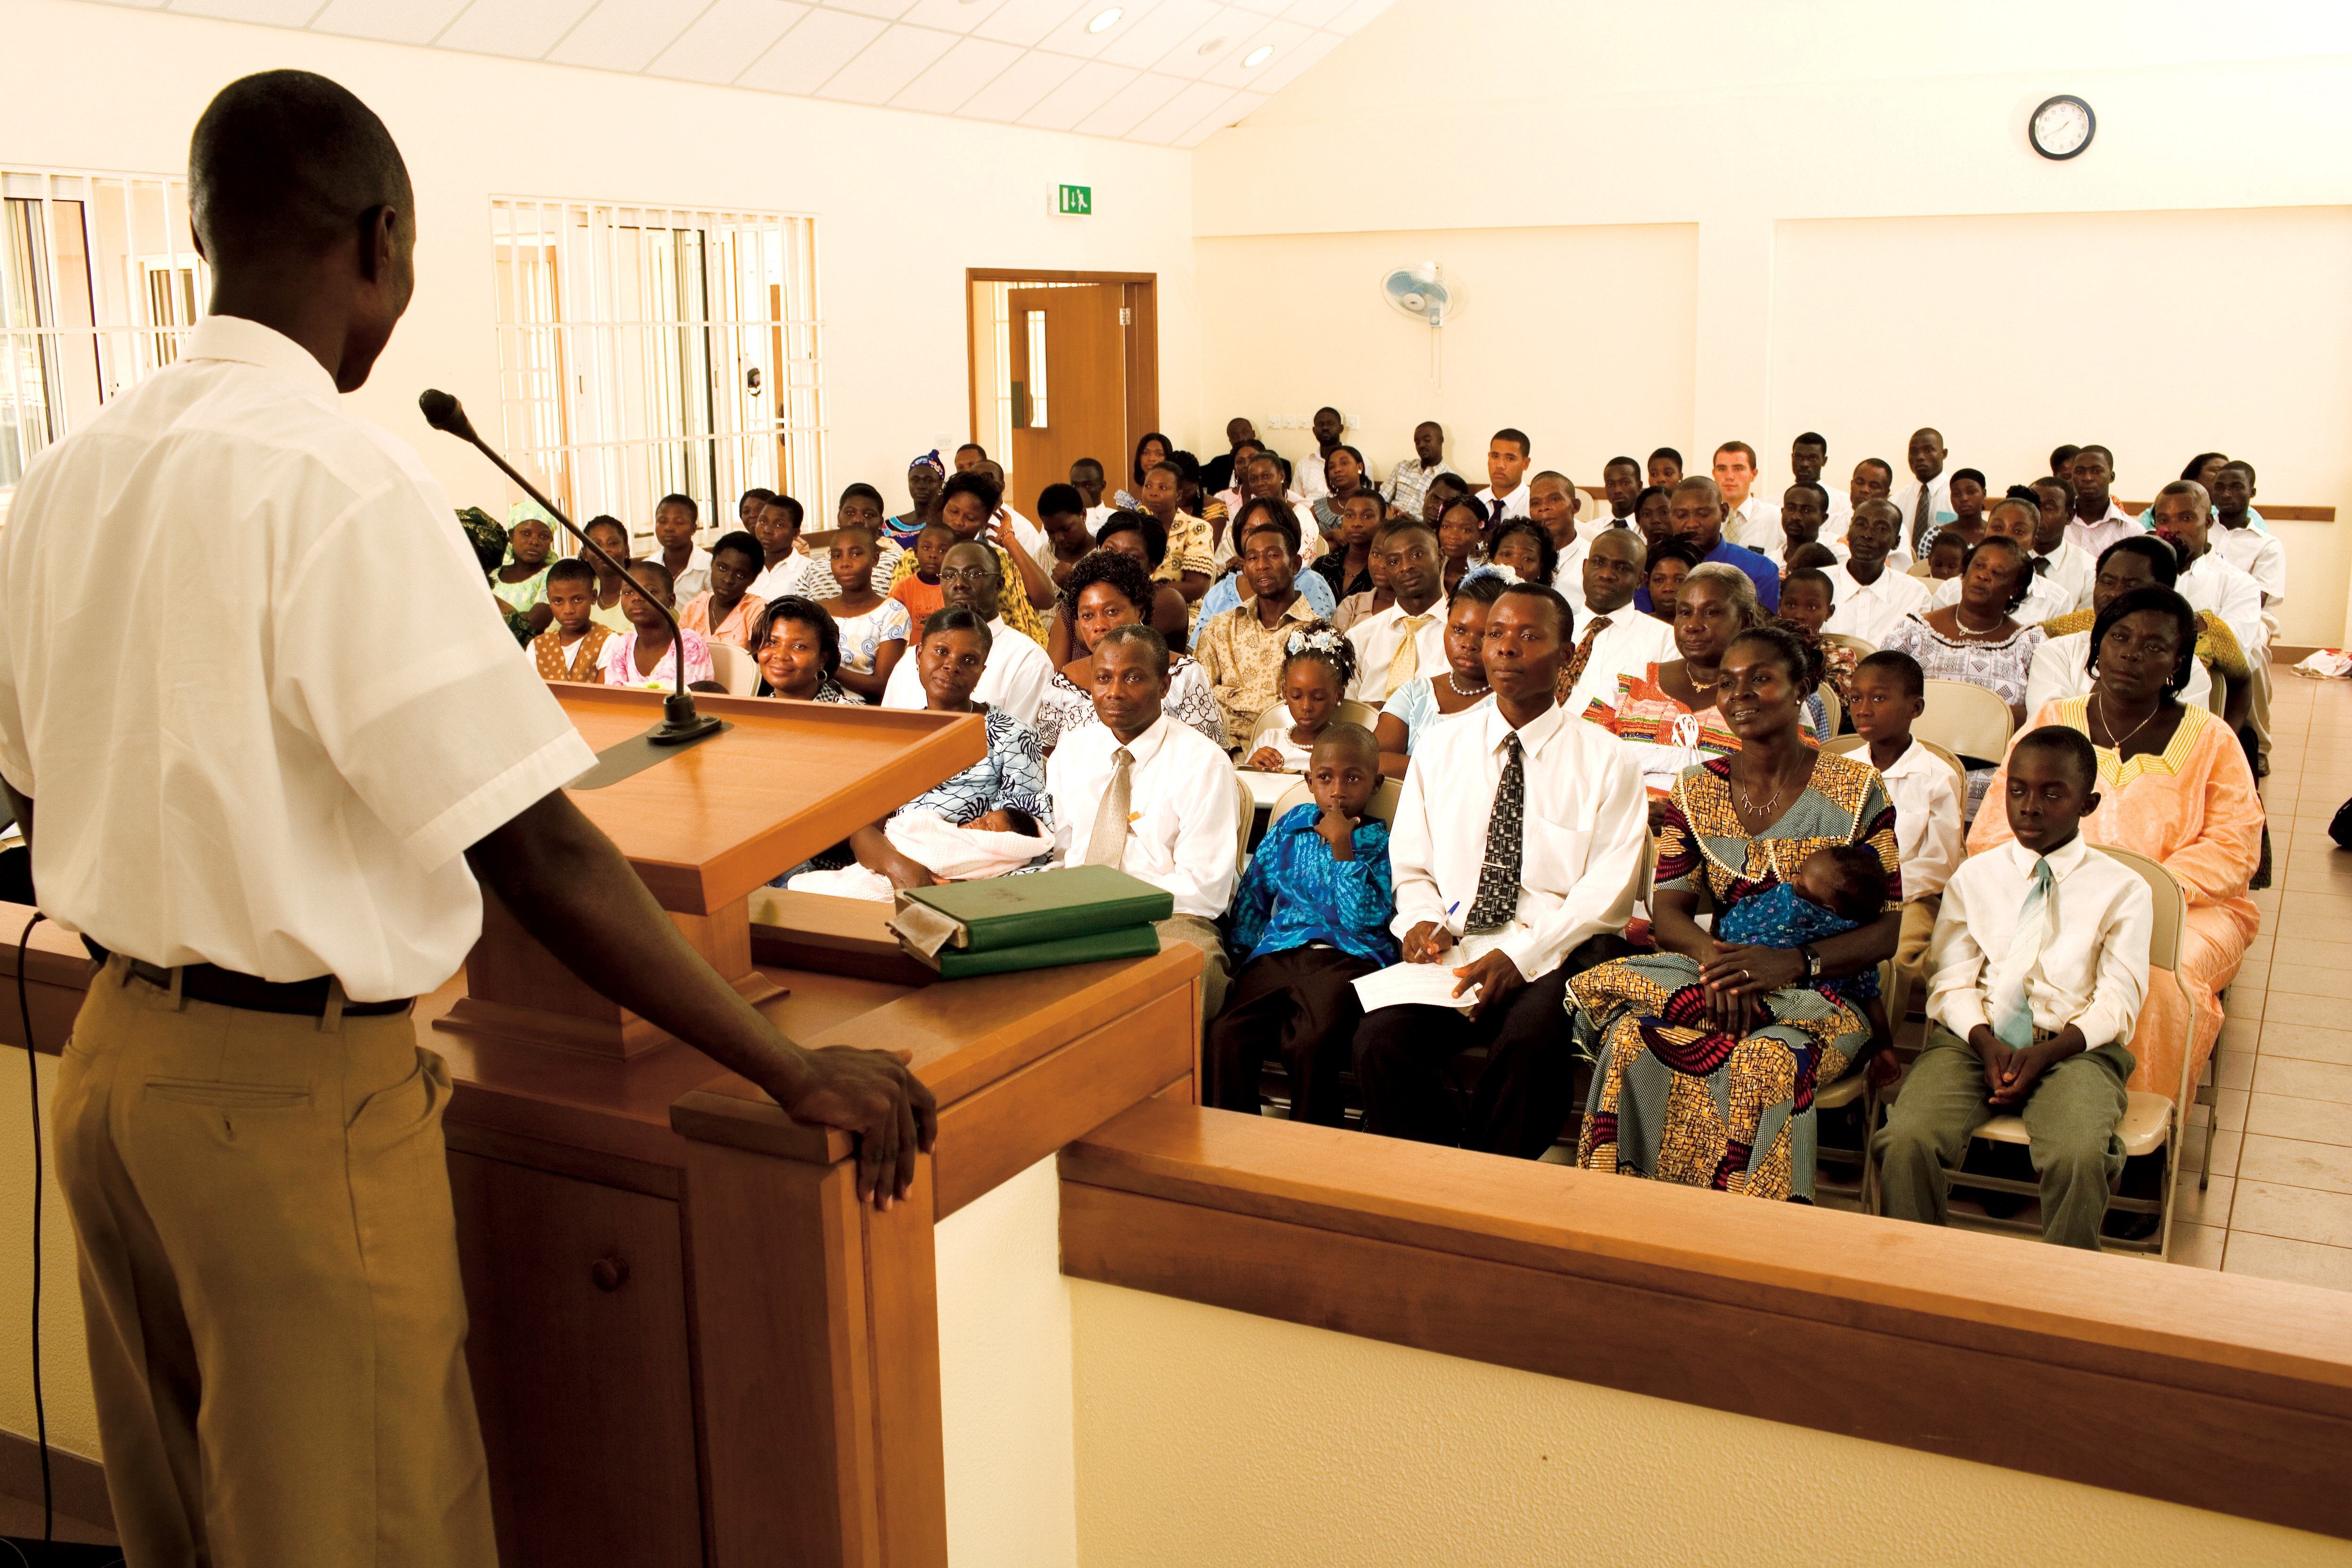 A man in a white shirt stands in front of a large congregation in Ghana and delivers a talk.